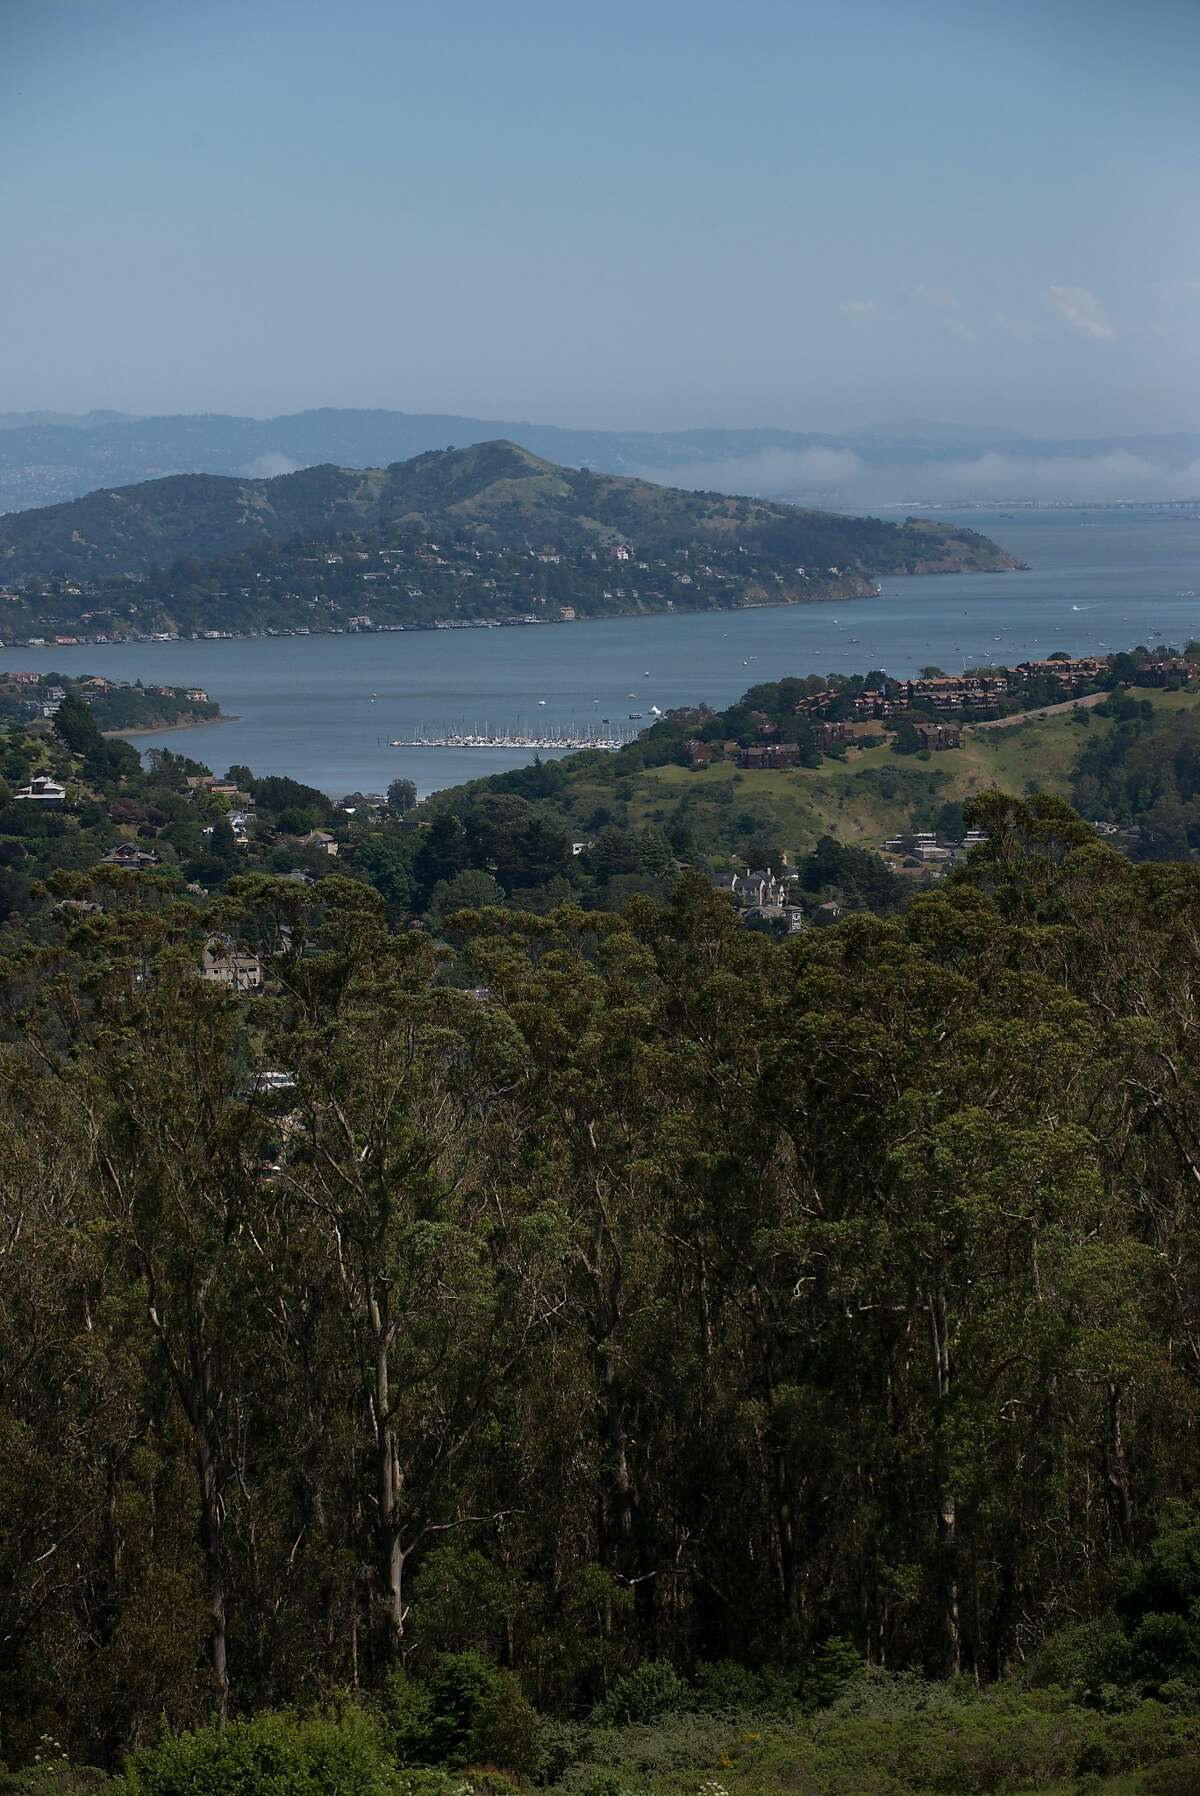 A view of Marin from the Panoramic Highway. May 4, 2017